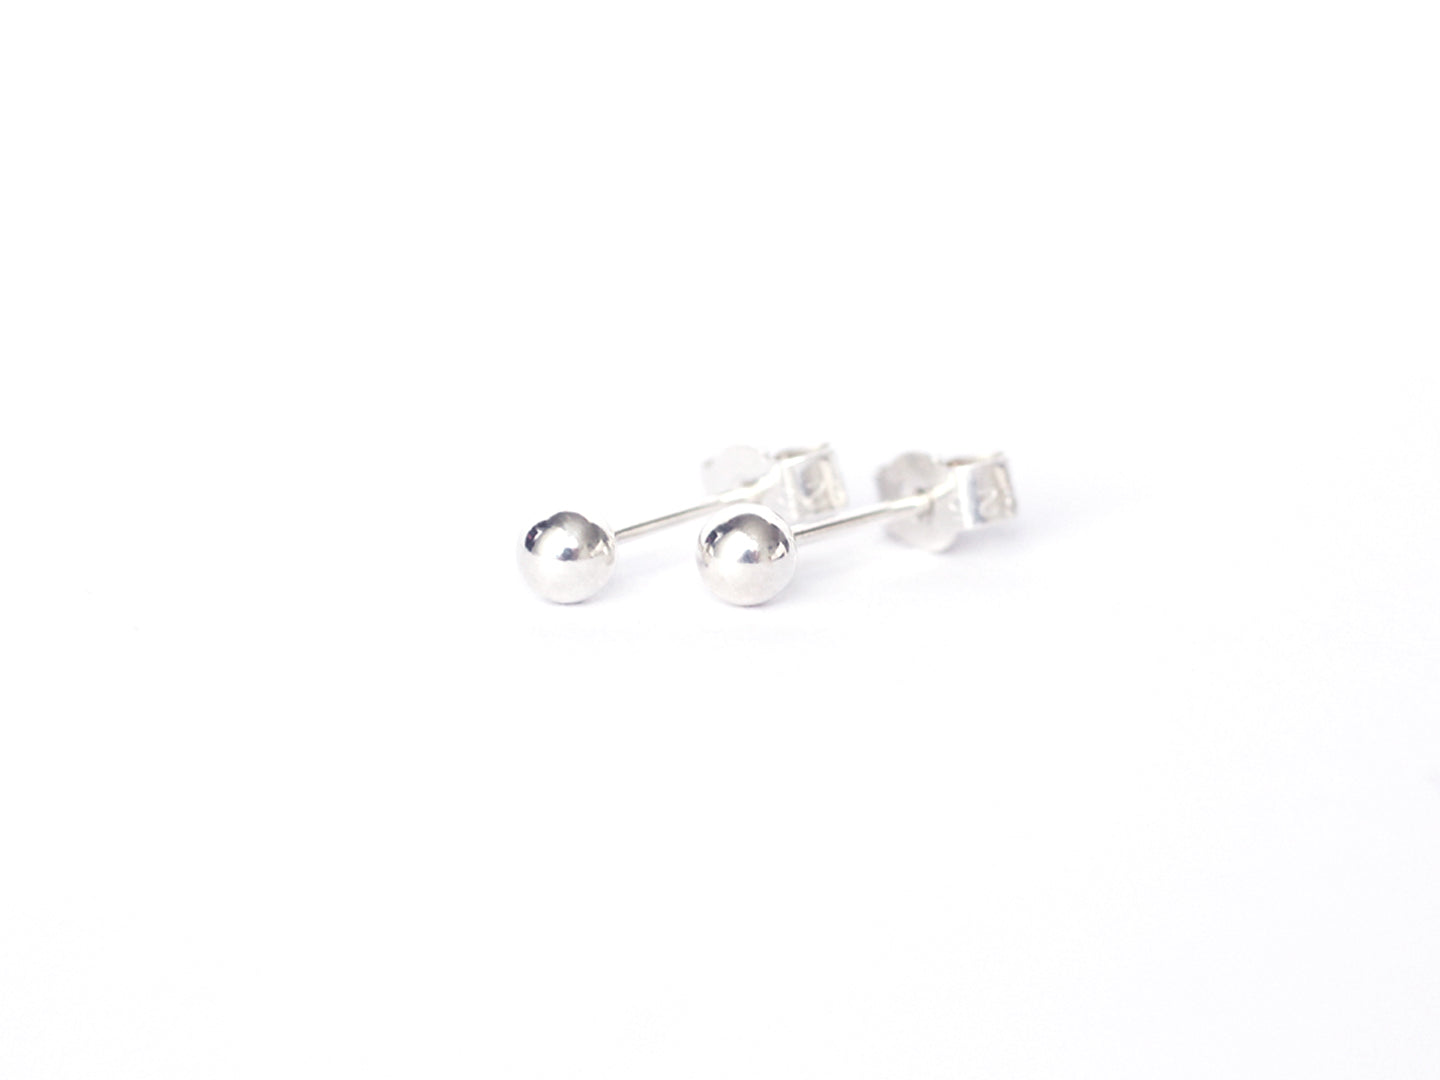 Dew-drop-silver-bead-stud-earrings-by-Marie-Beatrice-Gade-on-white-background